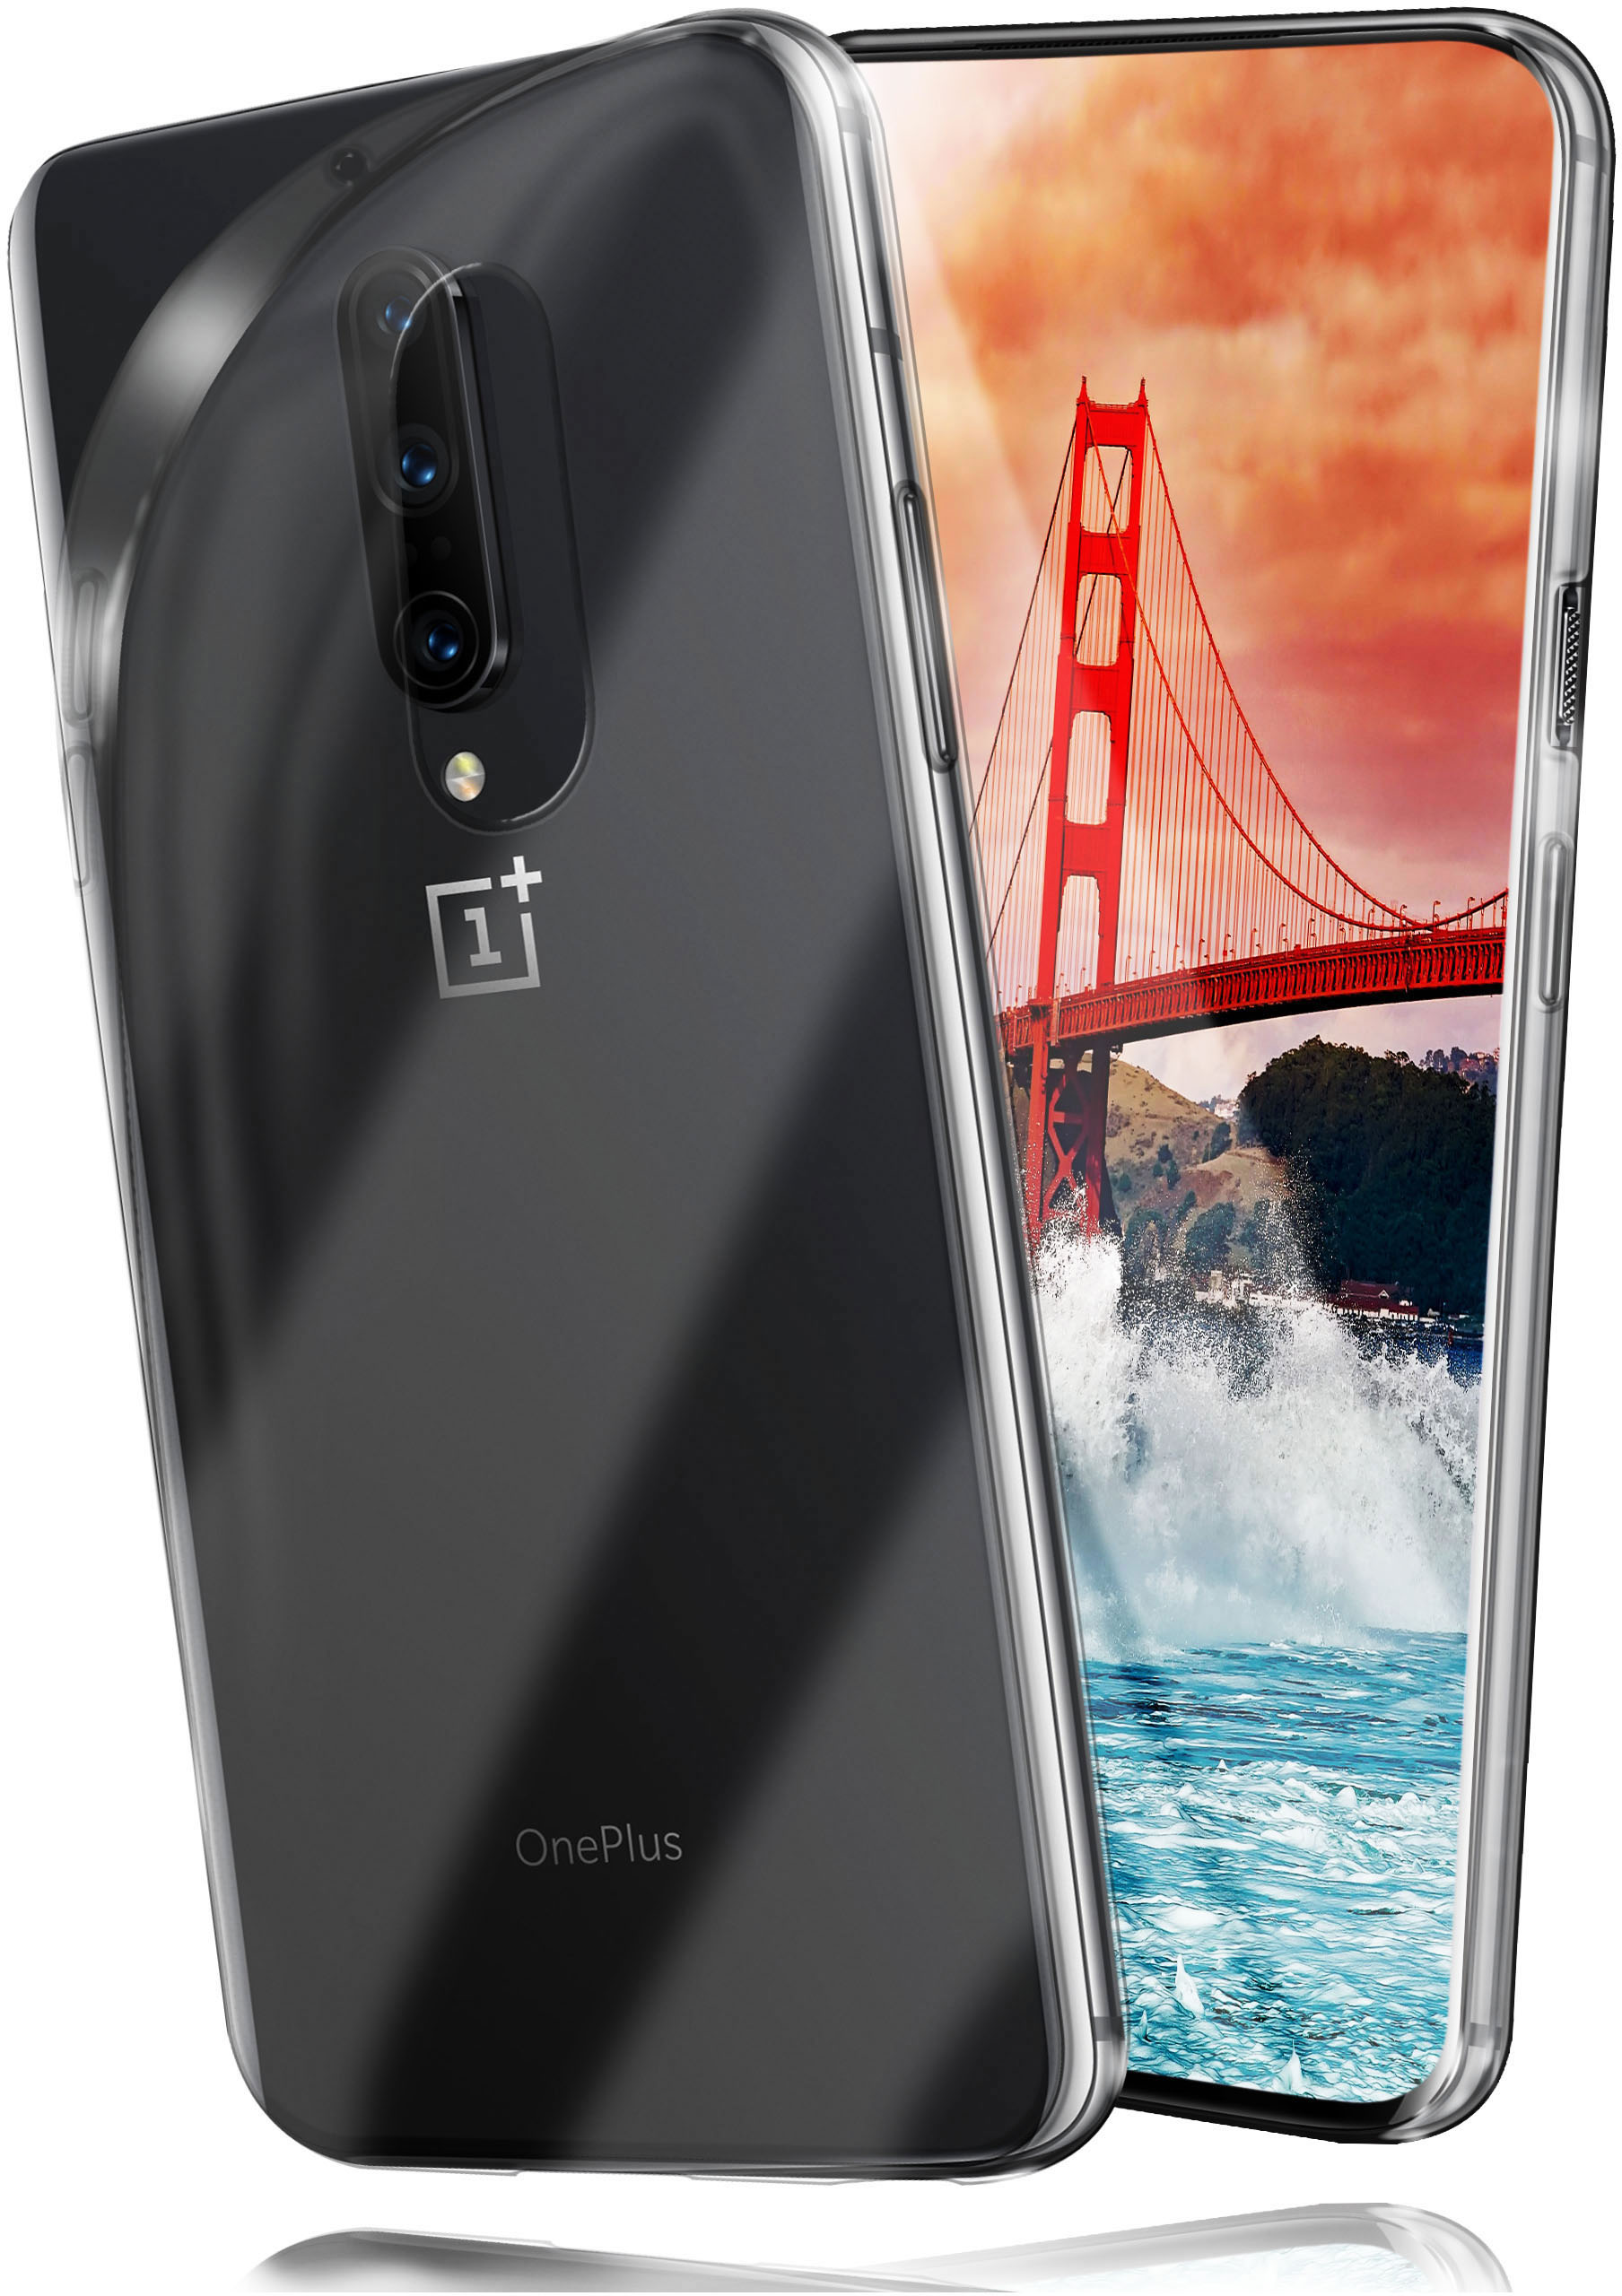 Case, Backcover, 7 OnePlus, Aero Crystal-Clear Pro, MOEX